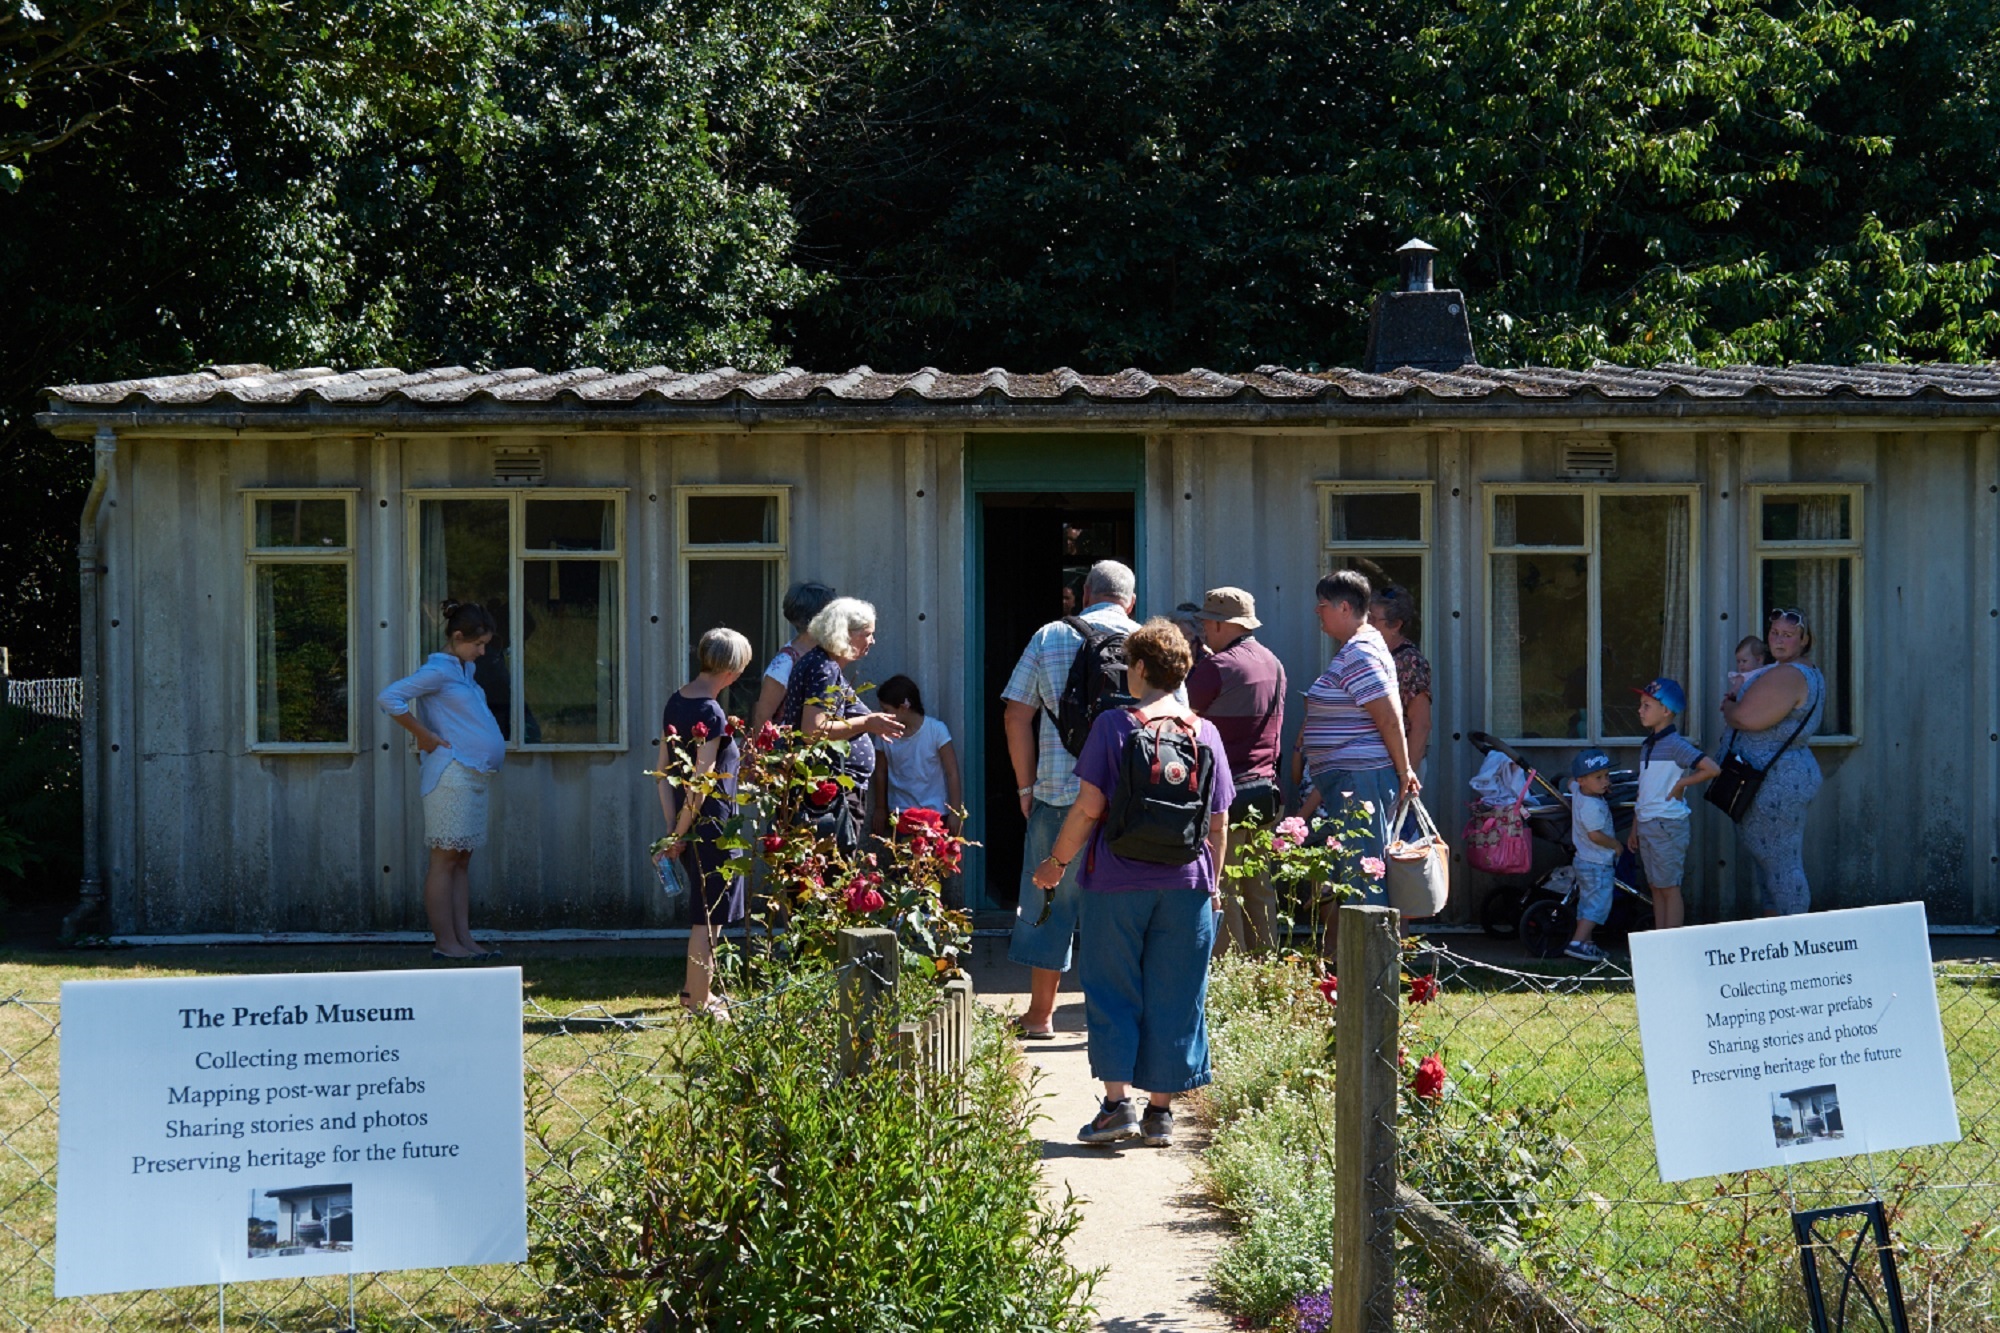 Moving Prefab event: Chiltern Open Air Museum 23 August 2016